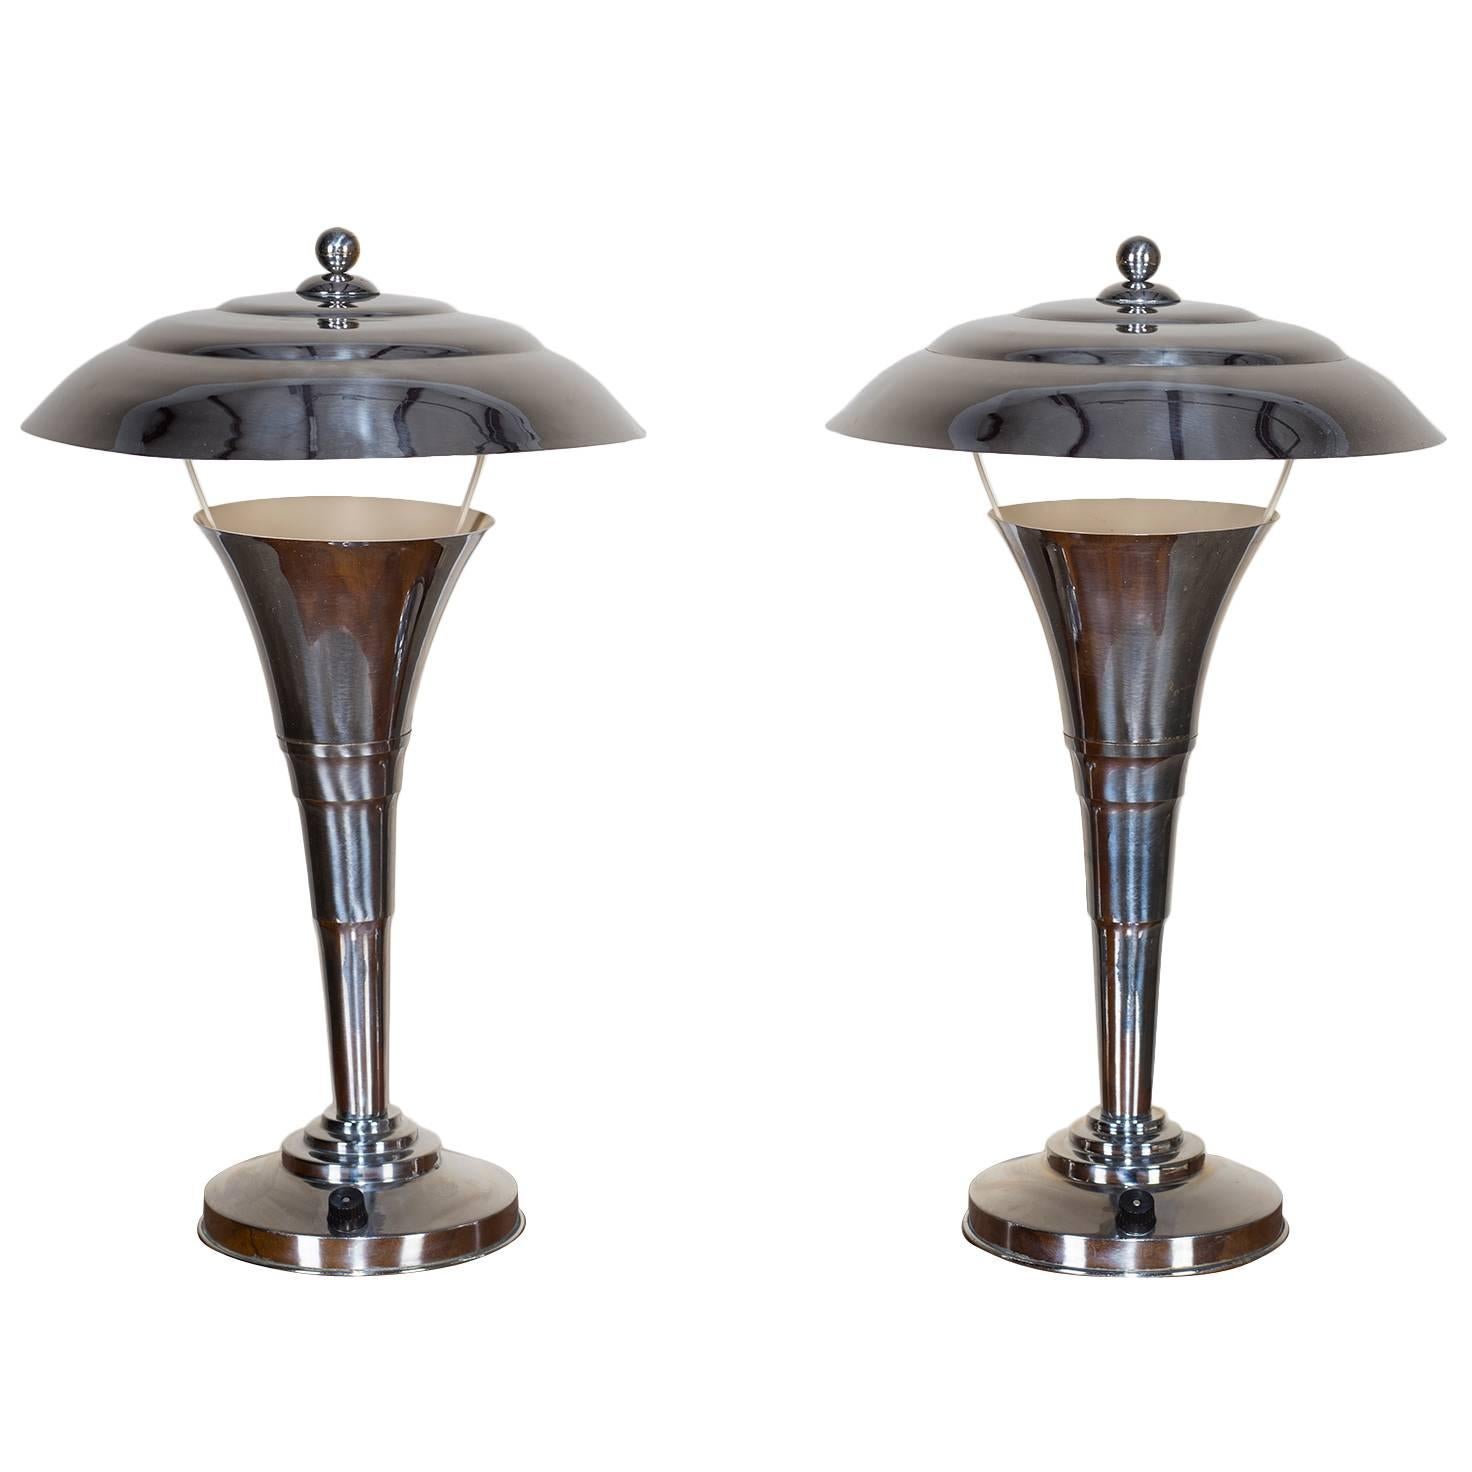 Pair of Vintage French Art Deco Chrome Lamps, circa 1935